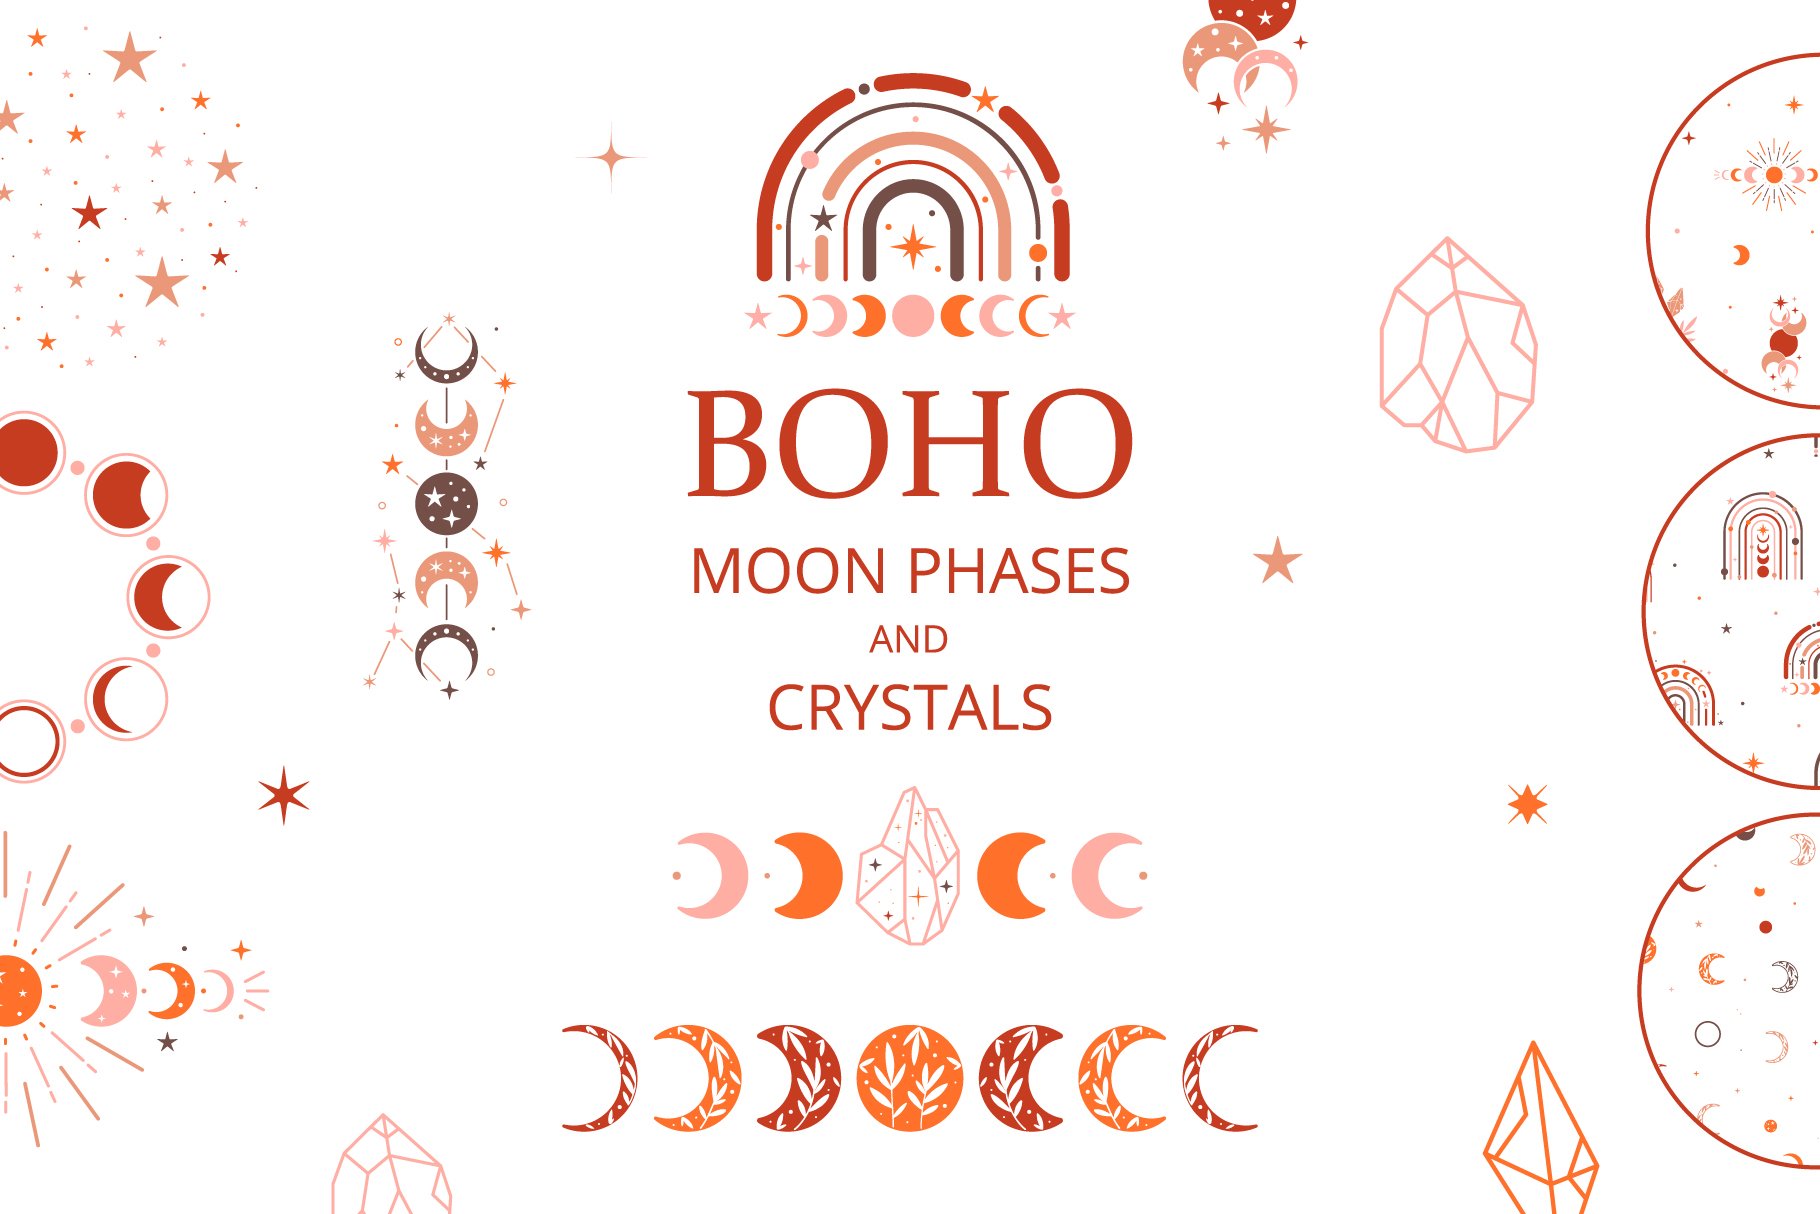 Moon Phases and Crystals cover image.